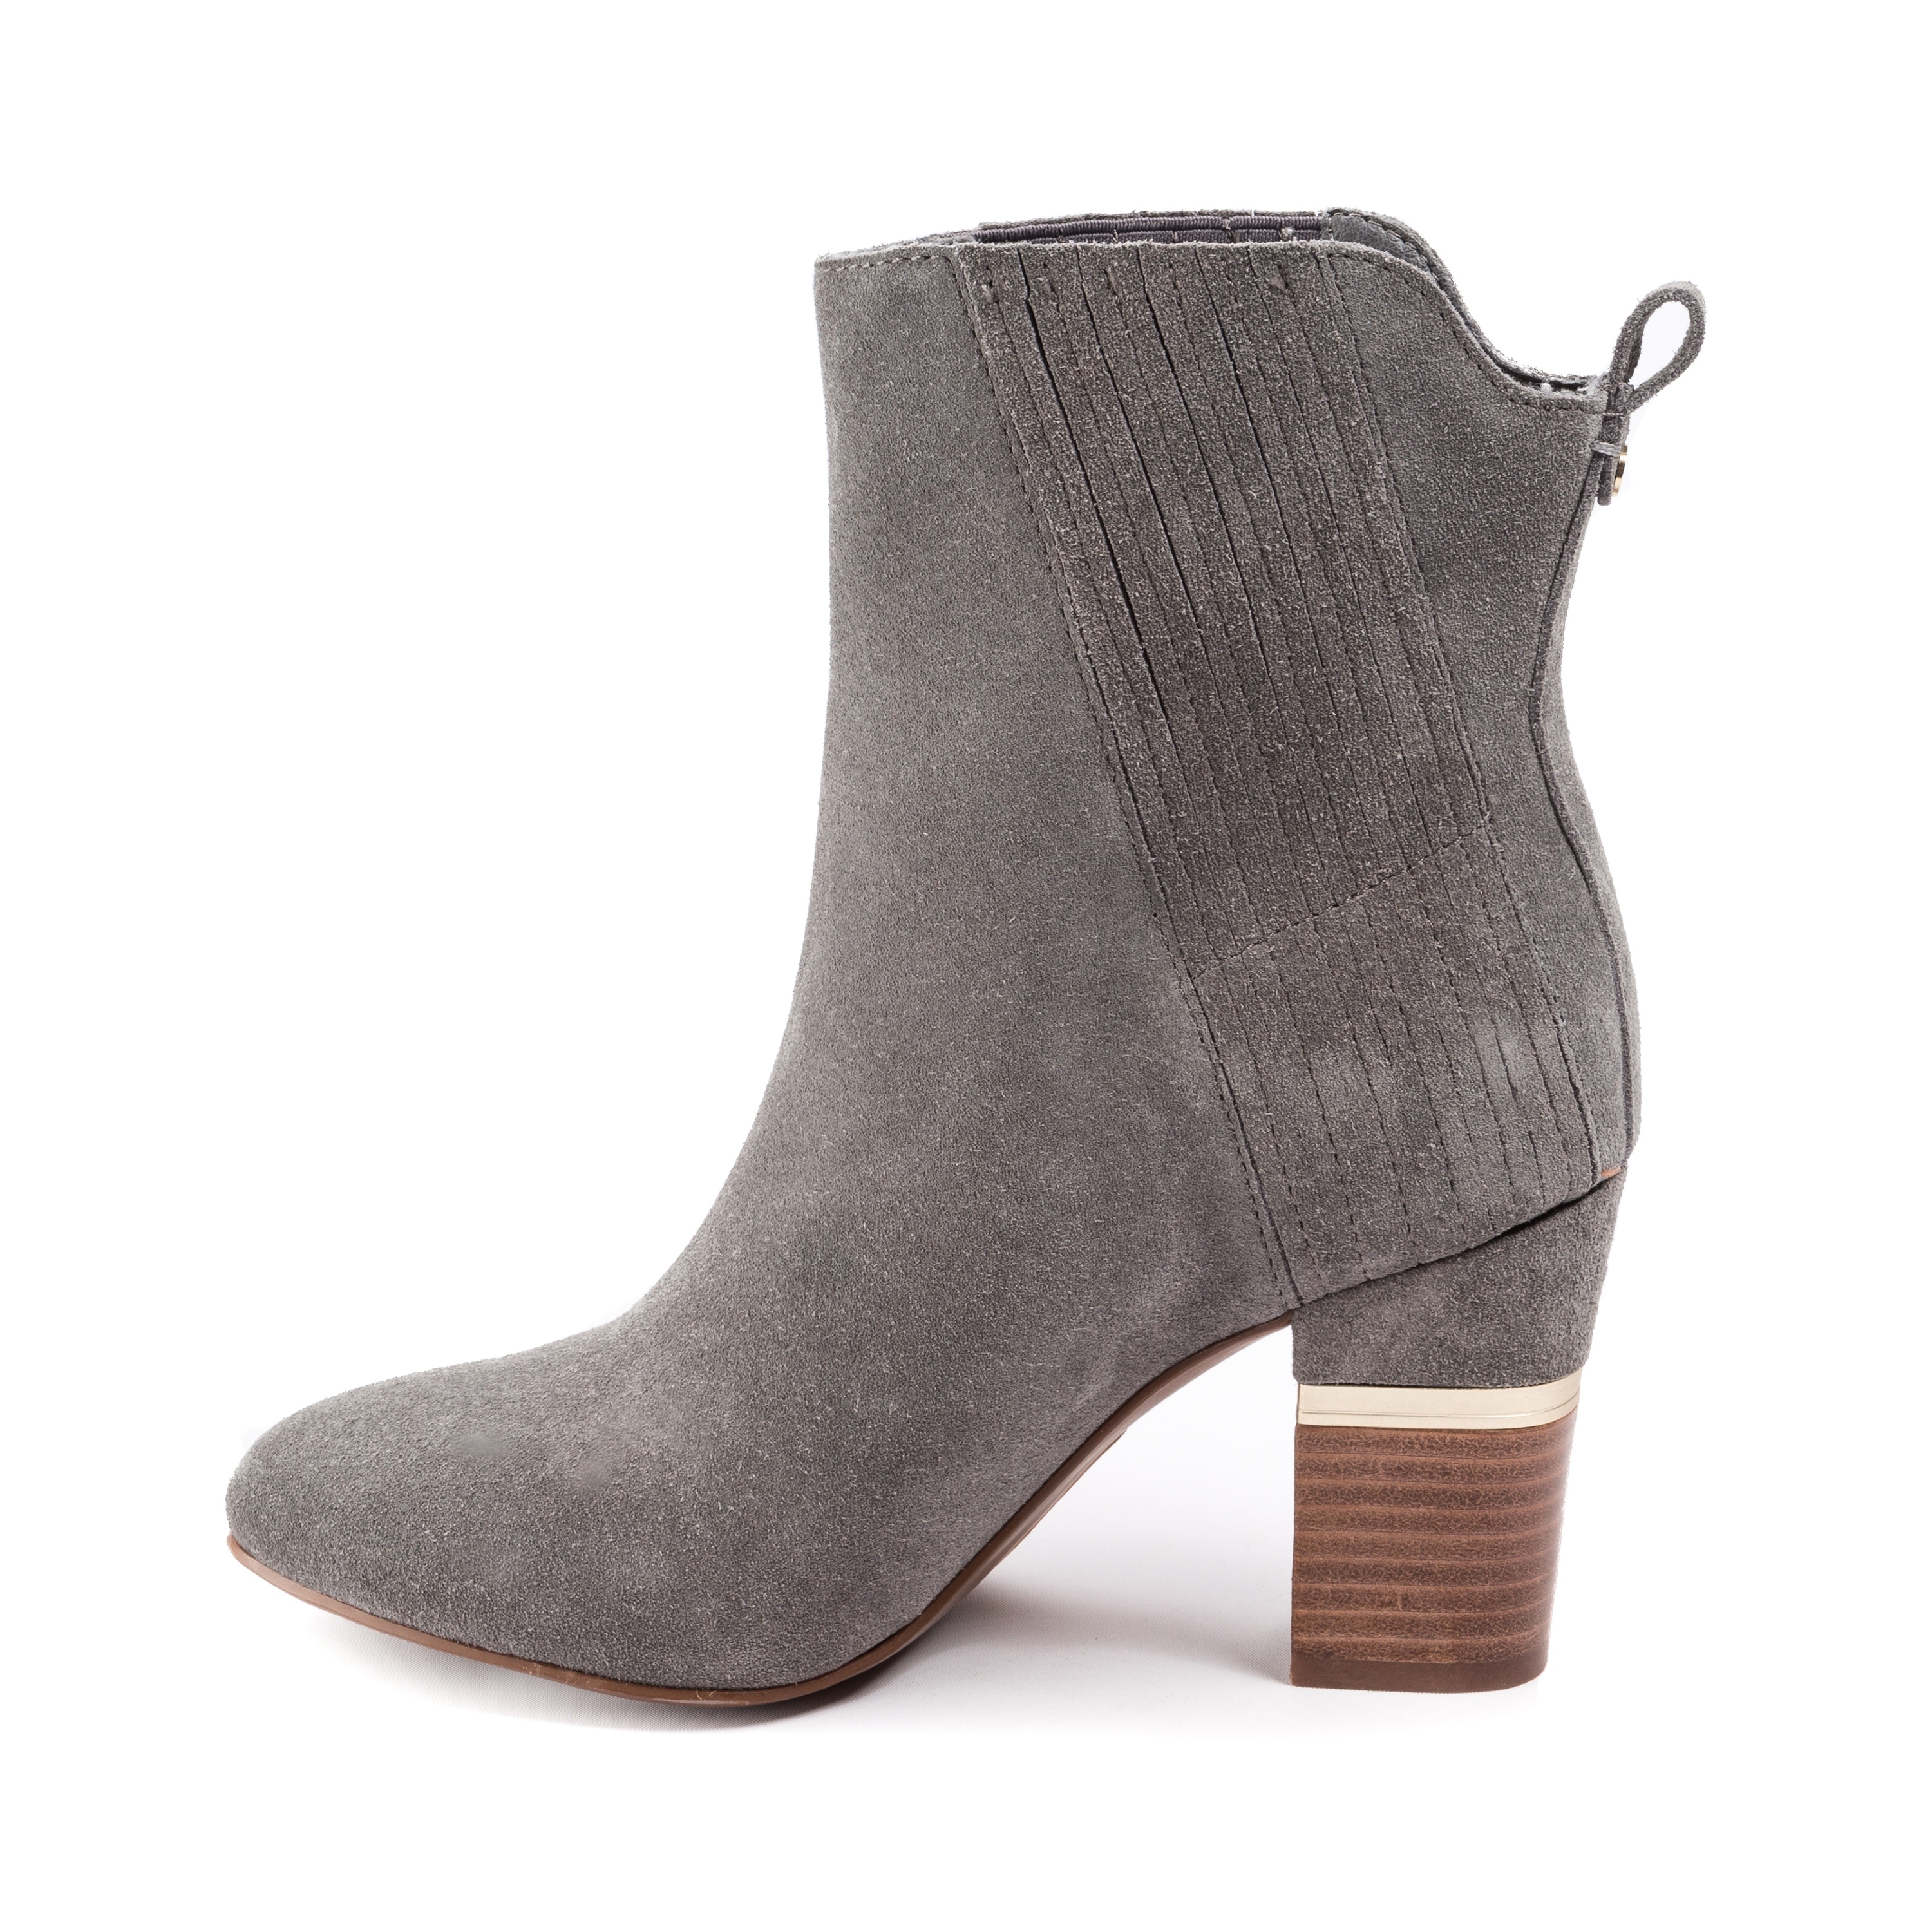 Lucca Lane Womens Jadia Leather Closed Toe Ankle Fashion Boots, Grey ...